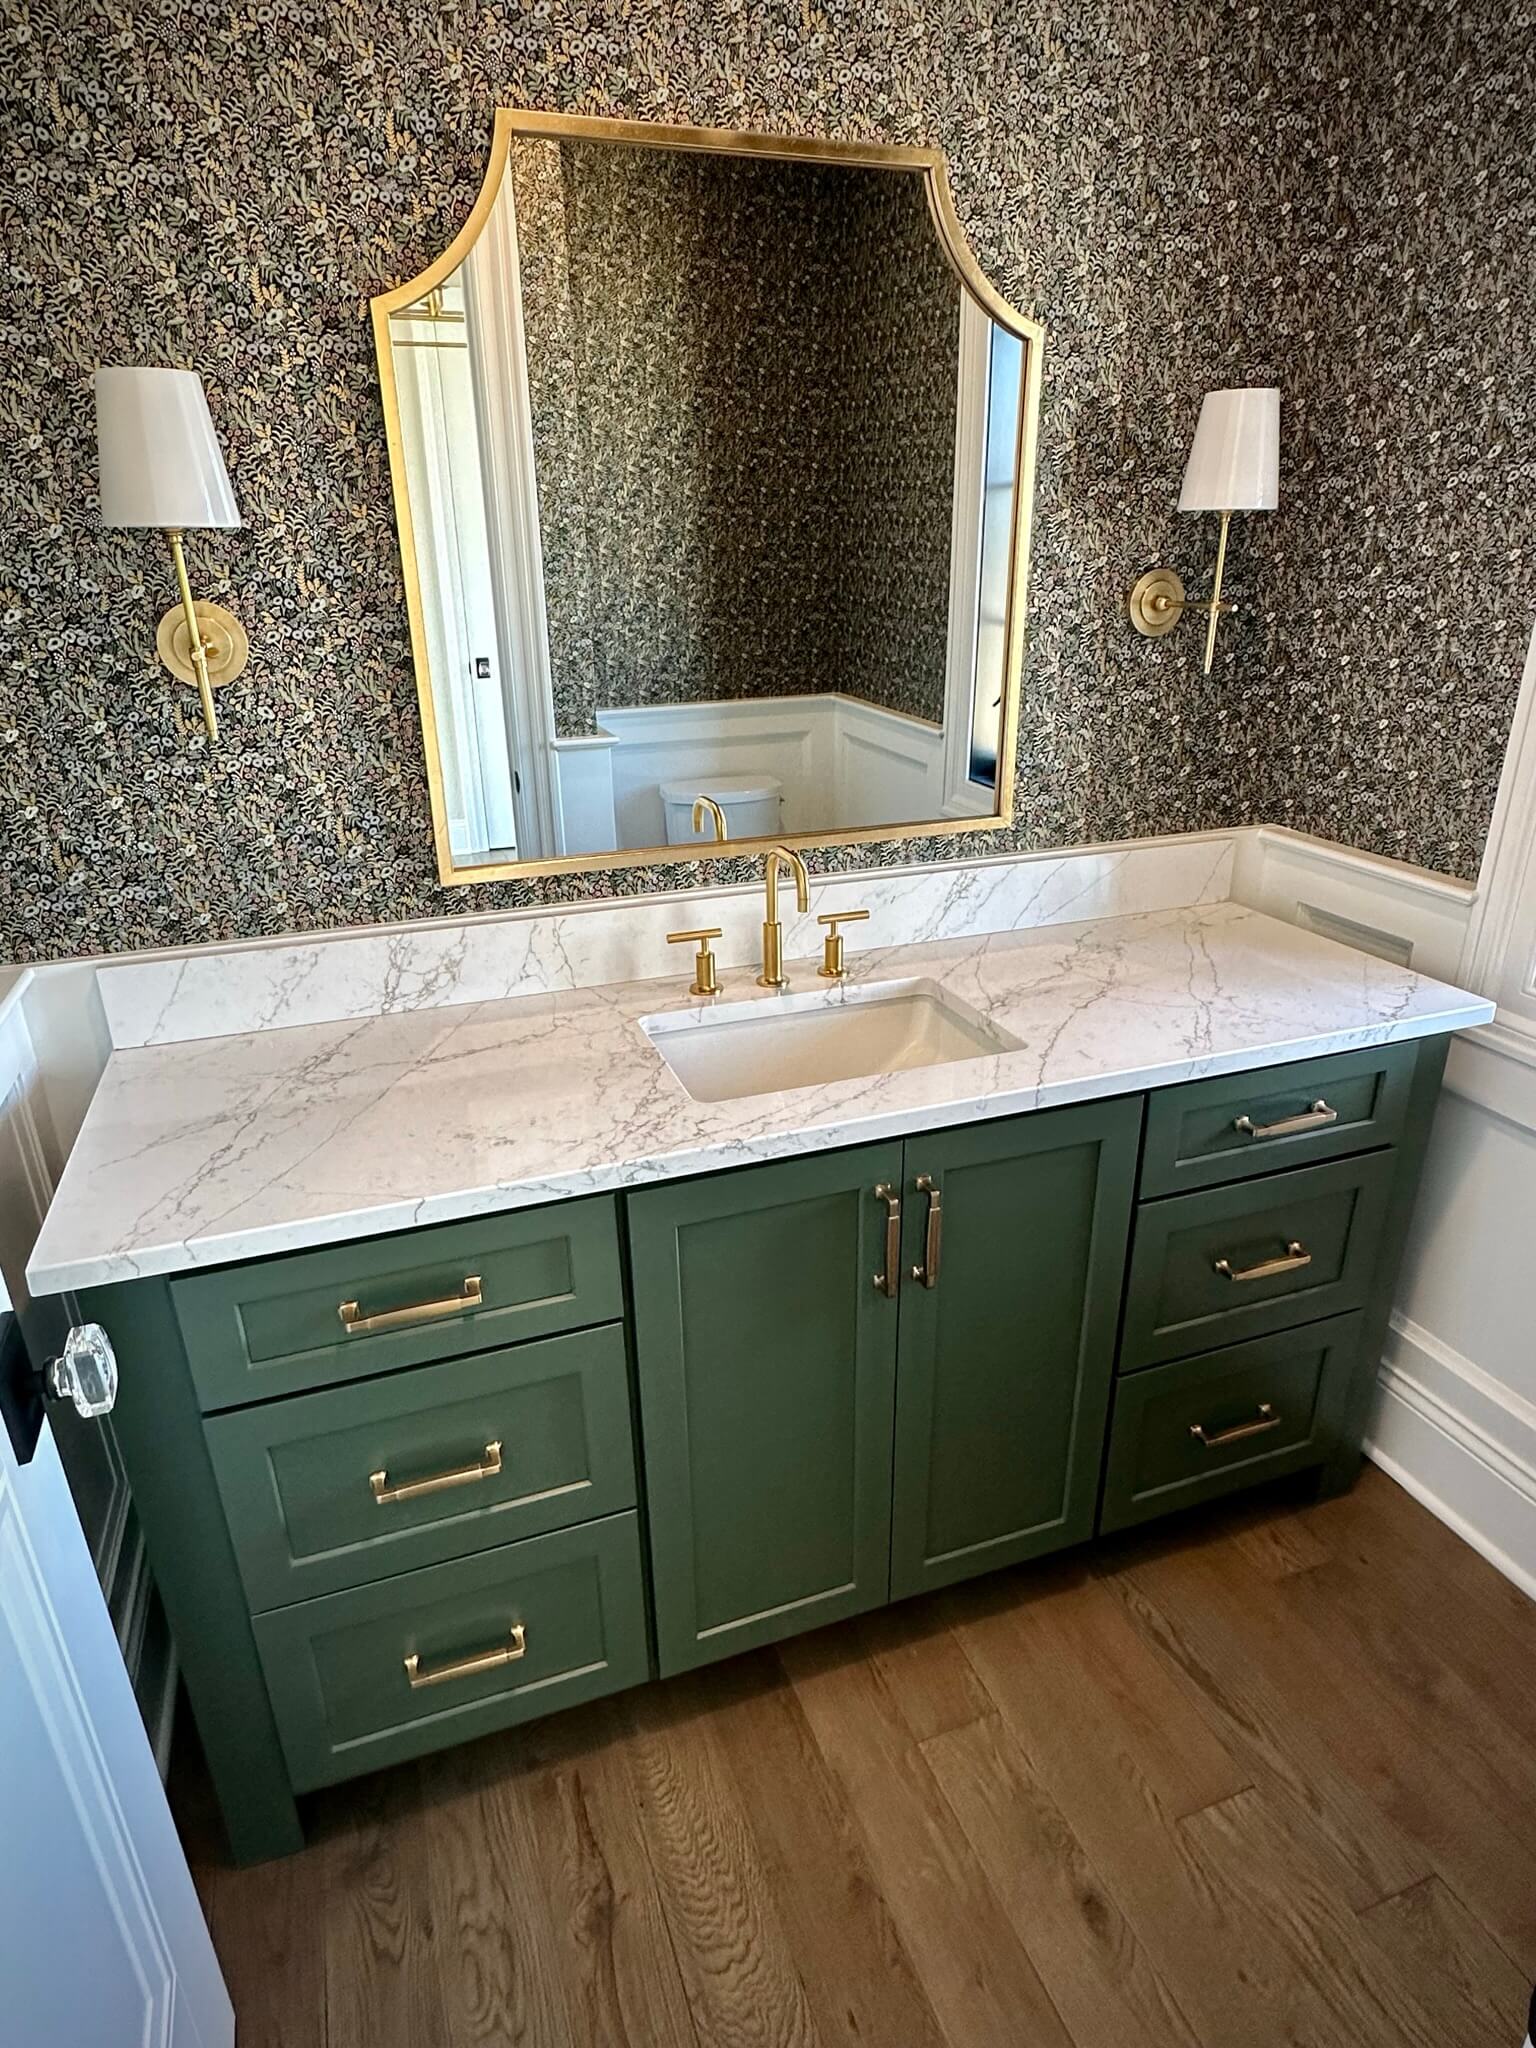 An elegant bathroom with an emerald green vanity crafted by Dura Supreme Cabinetry.